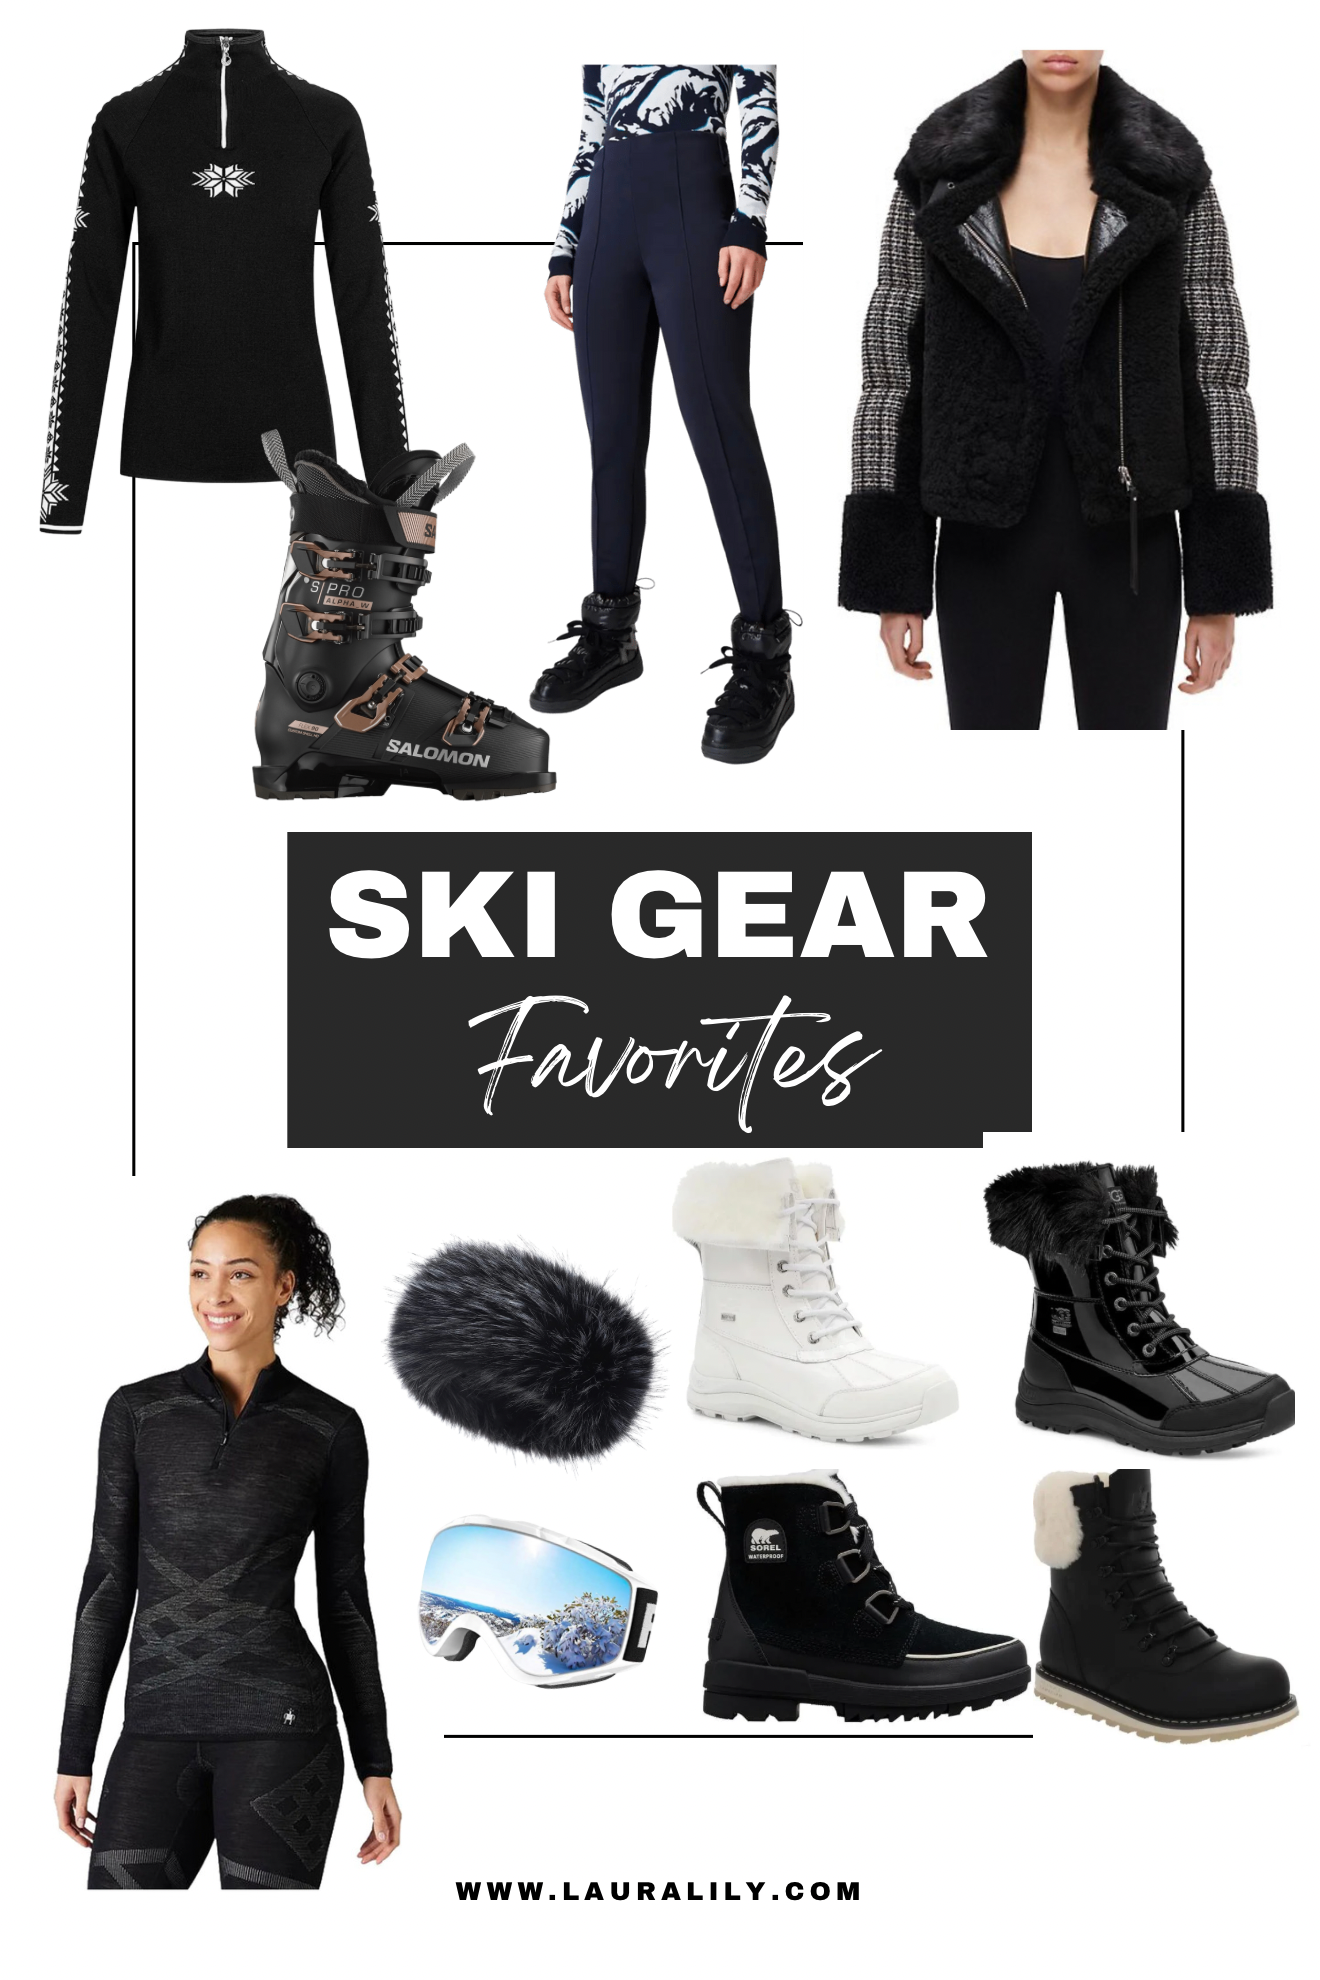 https://www.lauralily.com/wp-content/uploads/2022/11/Ski-Gear-Favorites-COllage.png